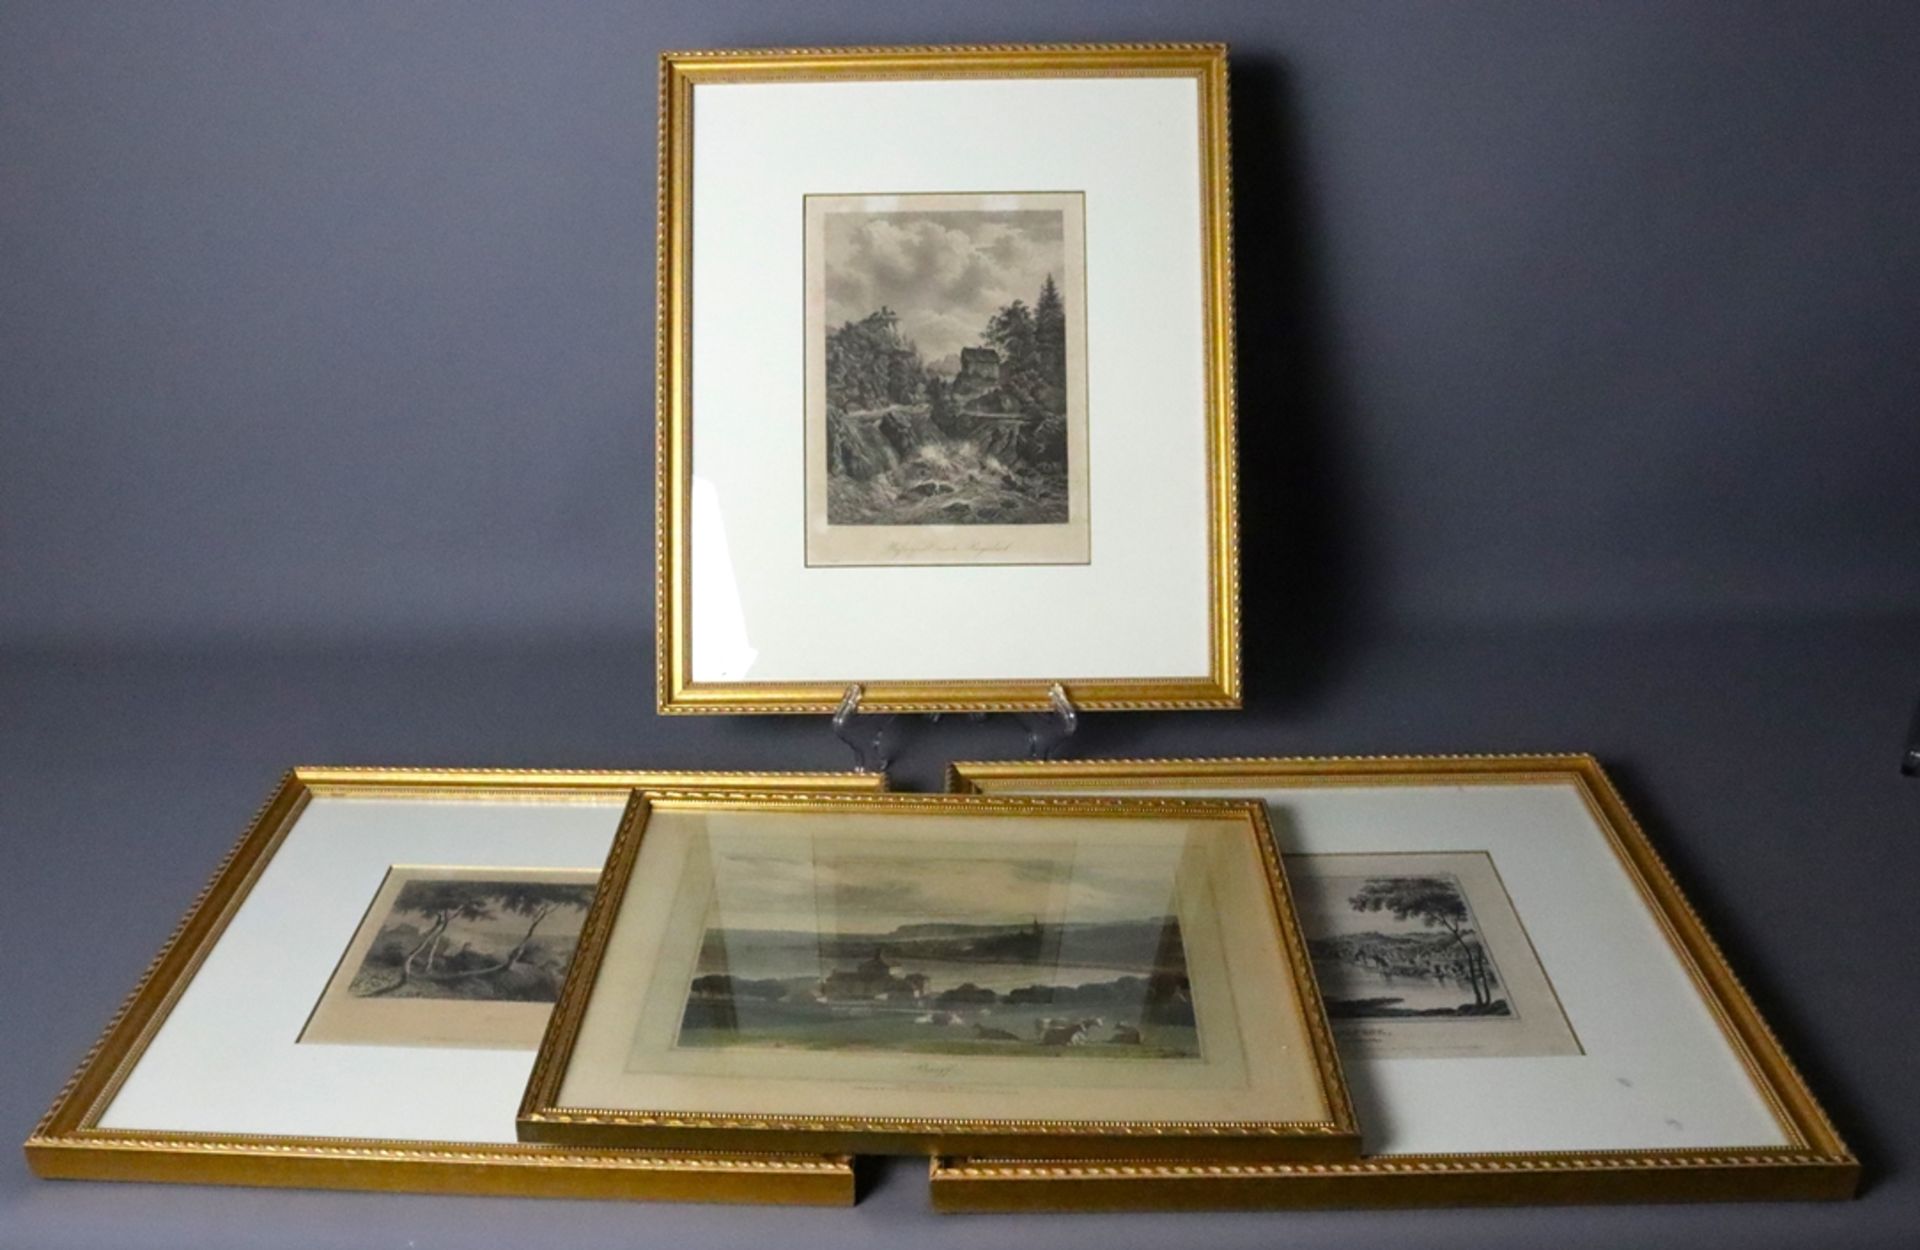 Sequence of 4 different lithographs, 19th/20th century, German